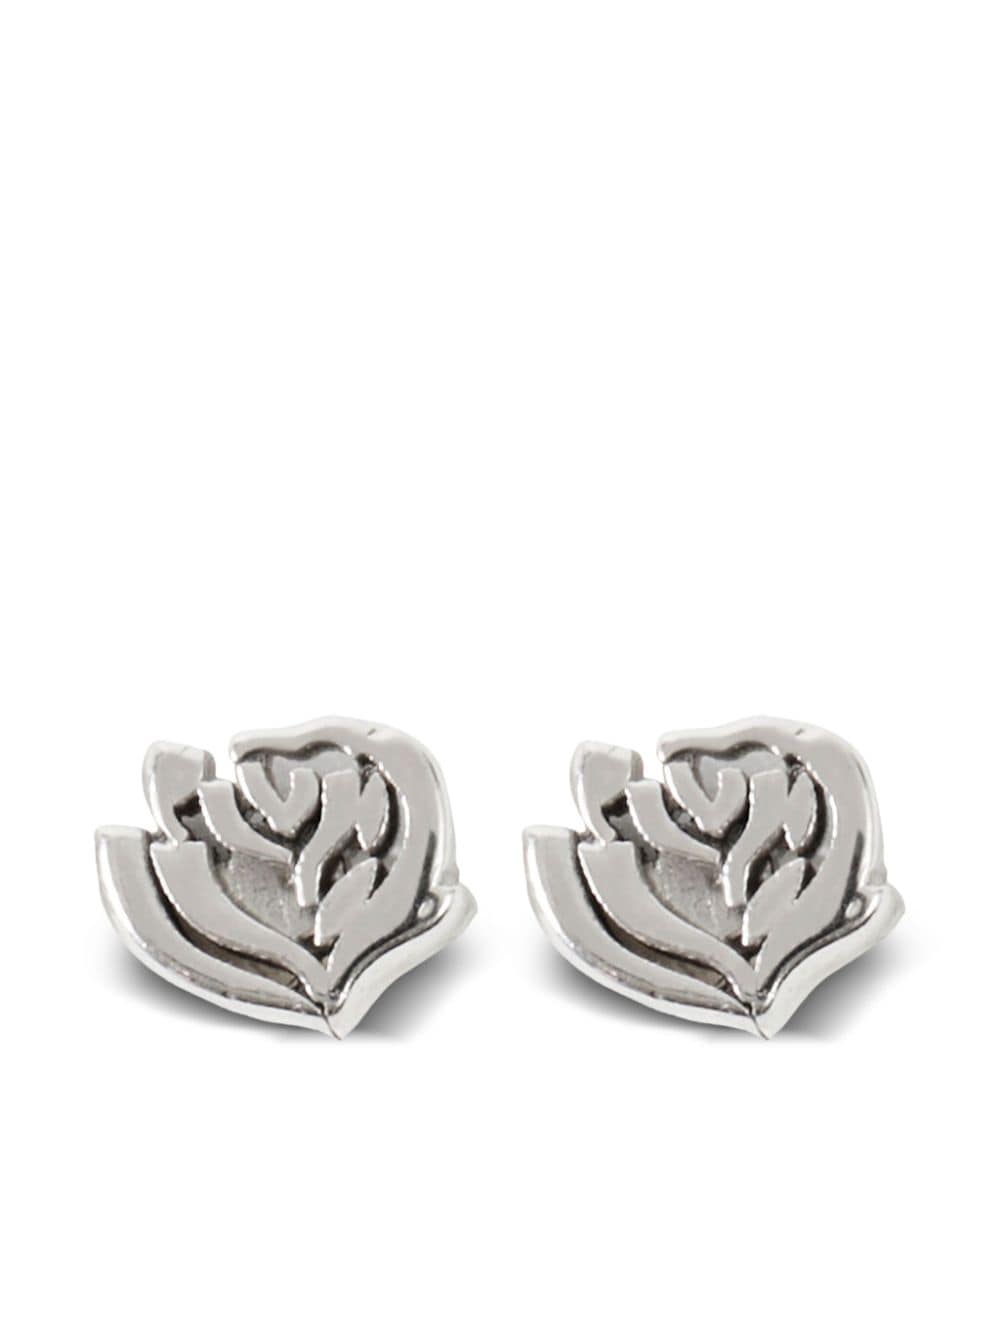 Burberry rose-stud earrings - Silver von Burberry